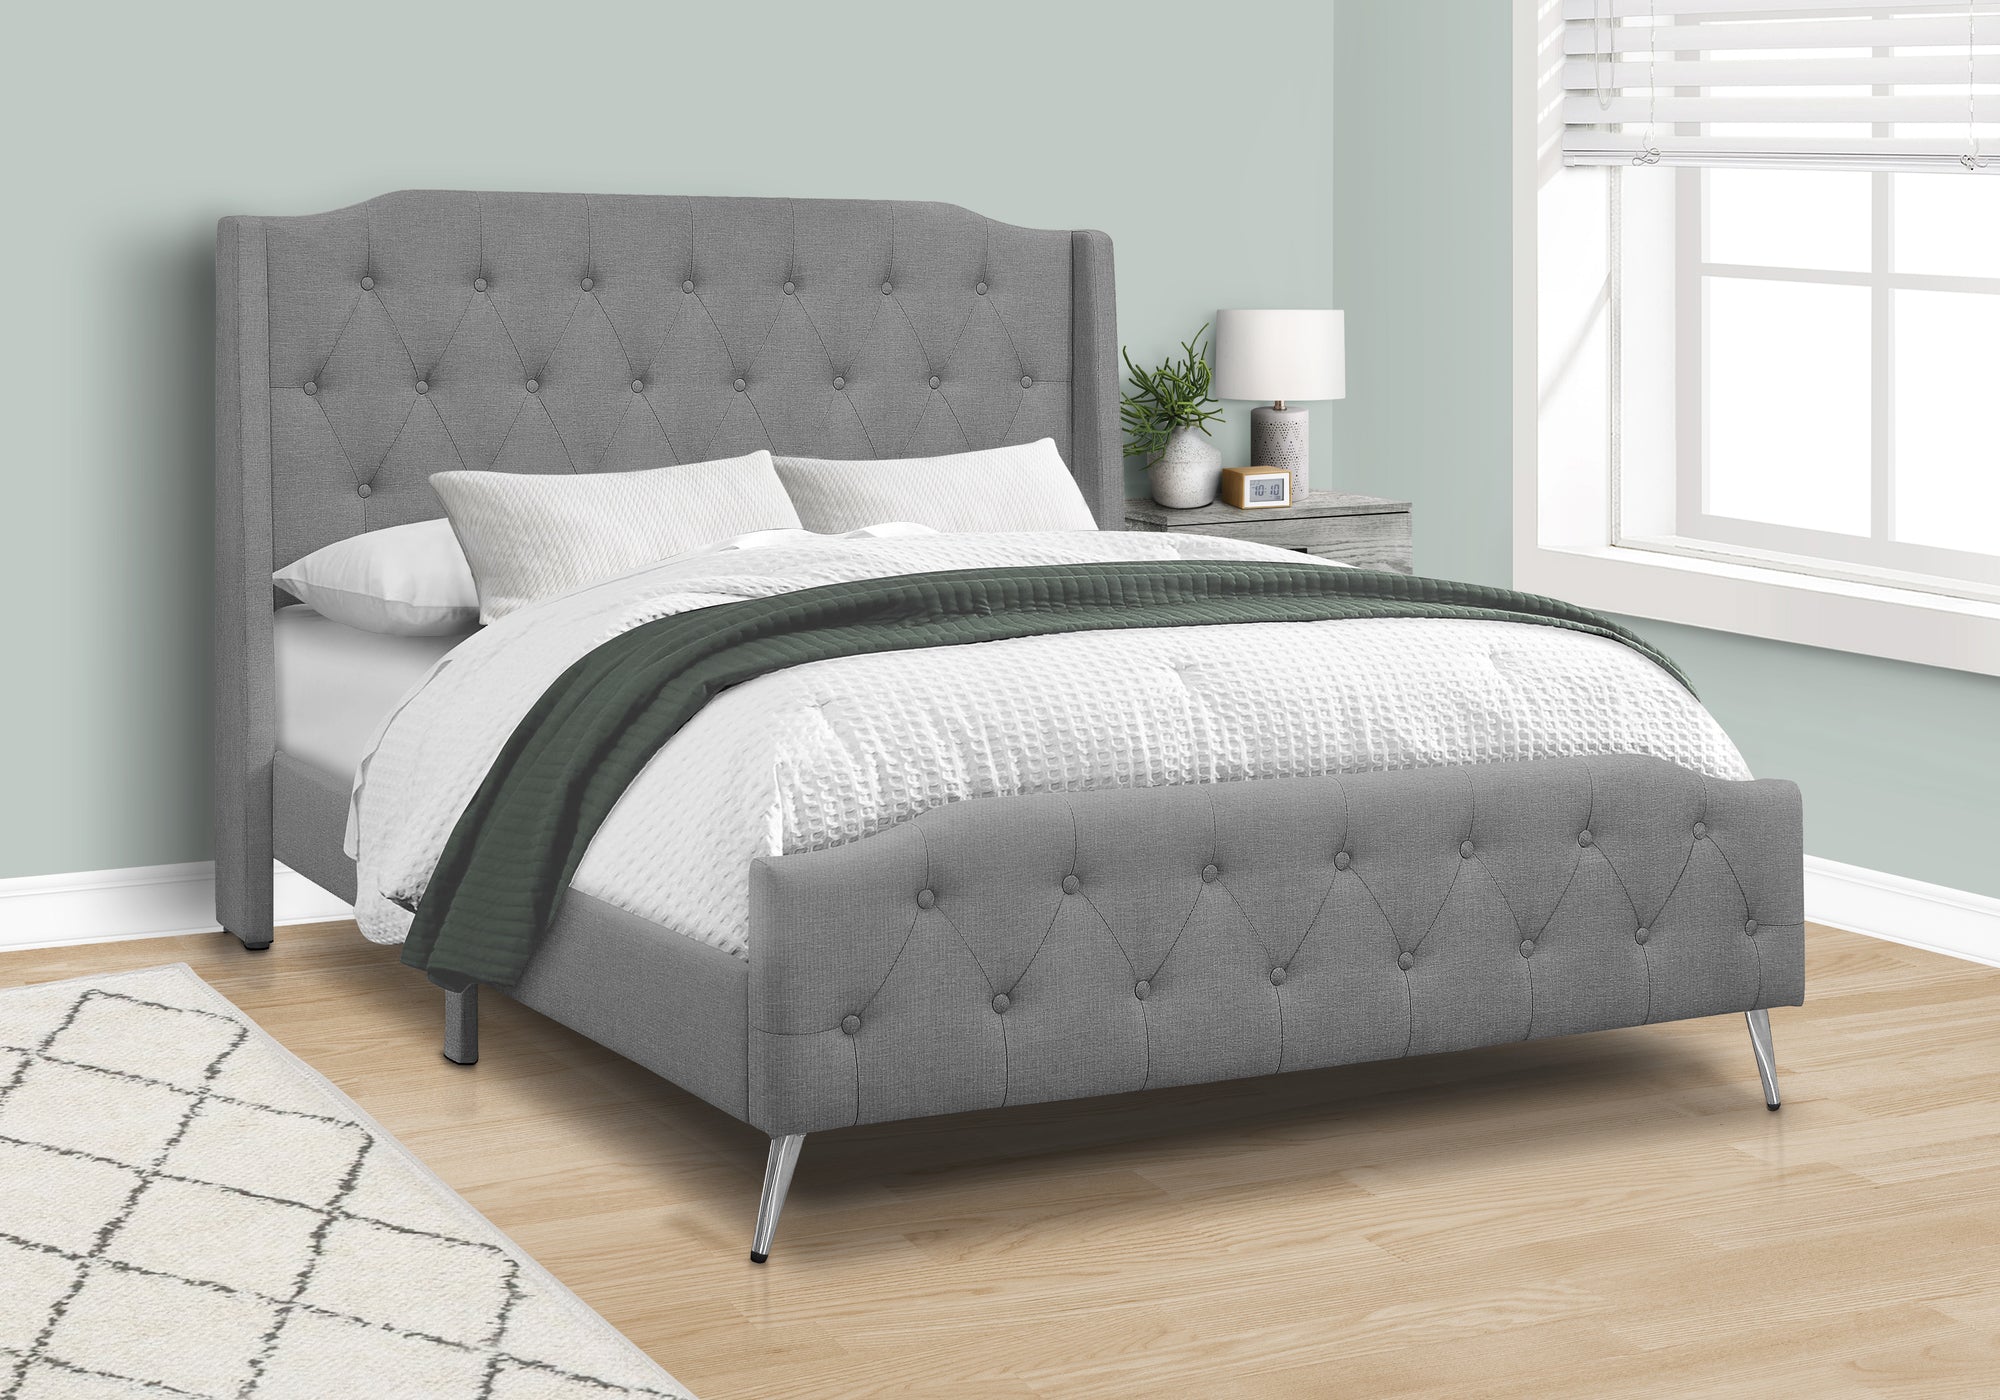 MN-946045Q    Bed, Queen Size, Bedroom, Upholstered, Grey Linen Look, Chrome Metal Legs, Transitional